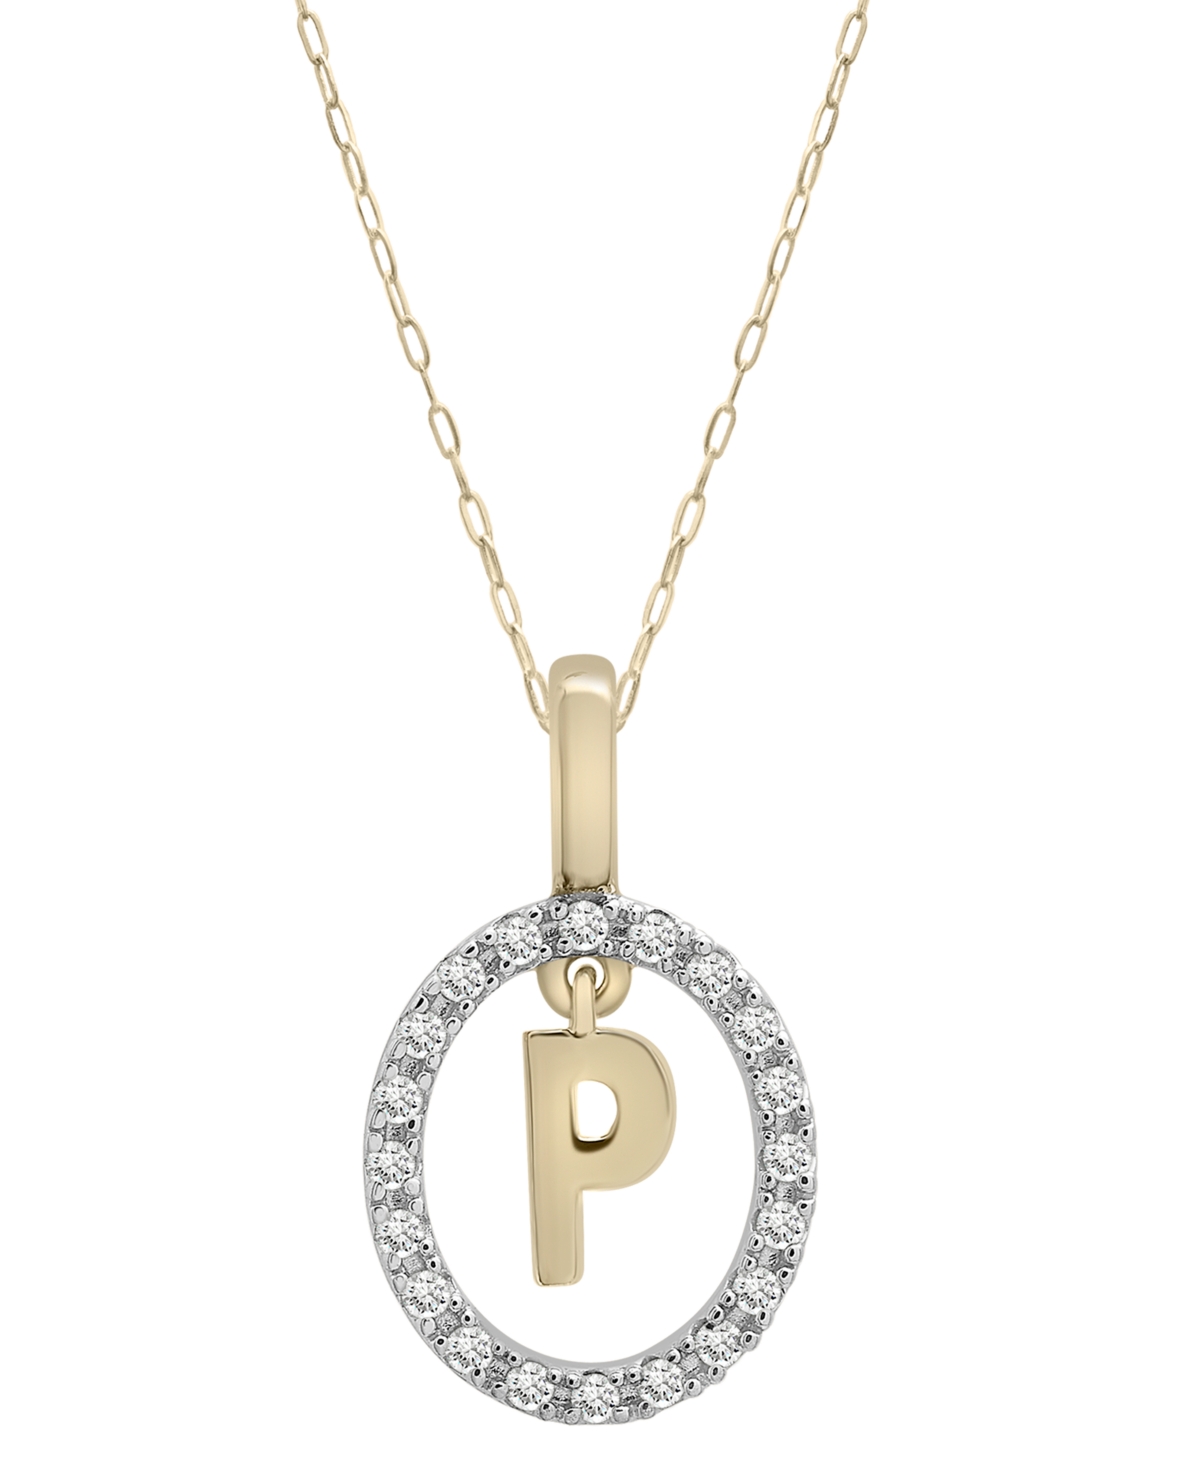 Diamond Initial "P" 18" Pendant Necklace (1/10 ct. t.w.) in 14k Gold, Created for Macy's - Yellow Gold